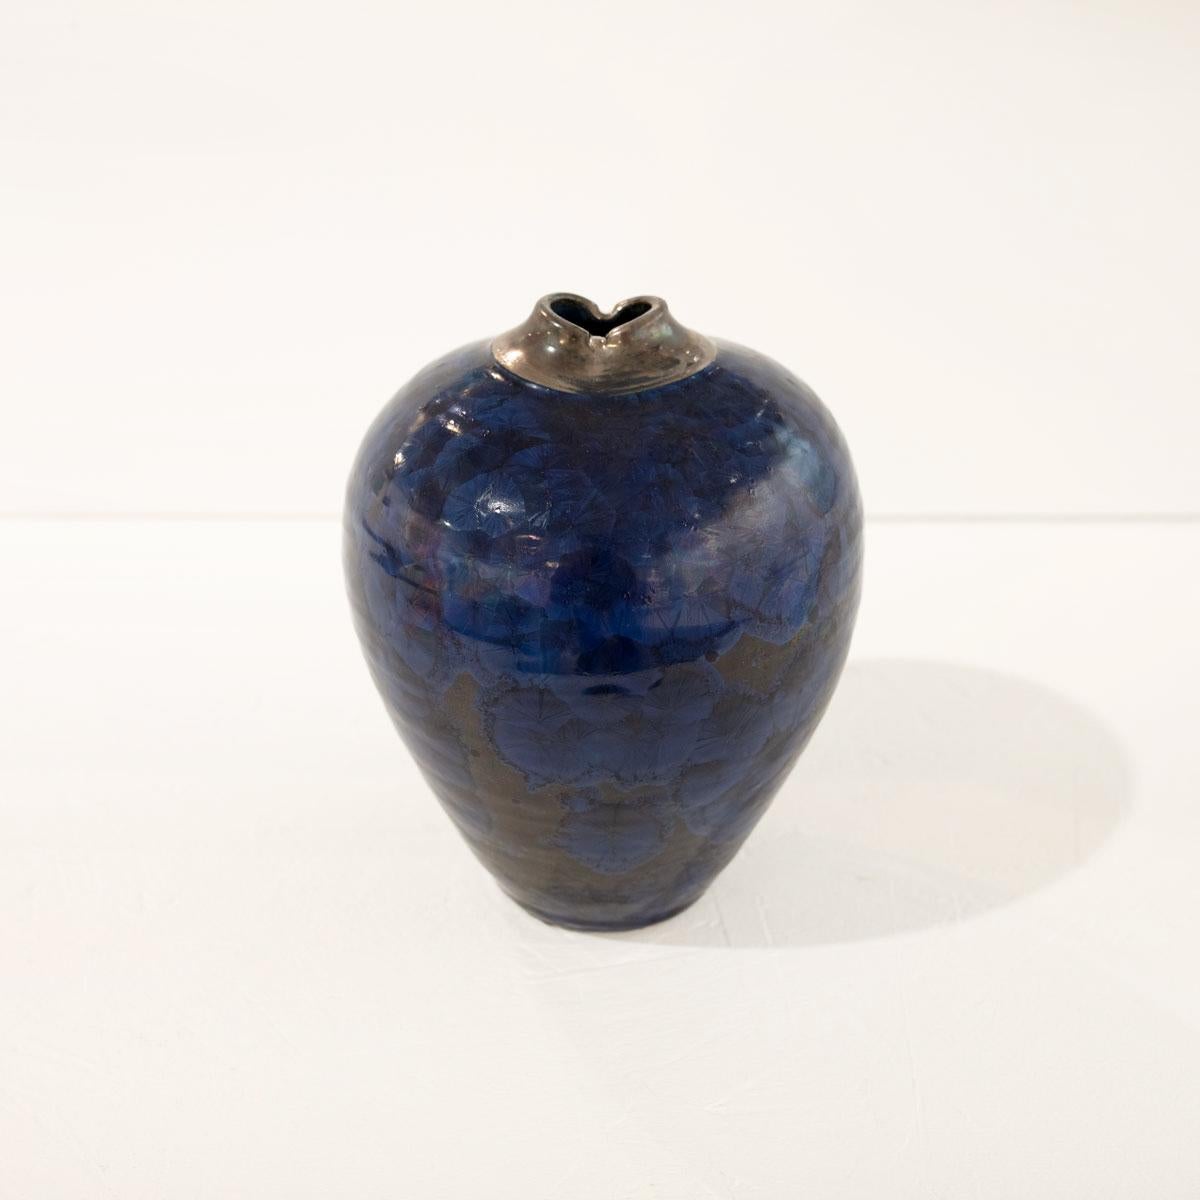 This small glazed porcelain sculptural vessel by Jon Puzzuoli features a blue palette with a crystalline glaze  a silver luster neck. The artist's stamp is located at the base of the vessel.

Crystalline glazes are special ceramic glazes in which